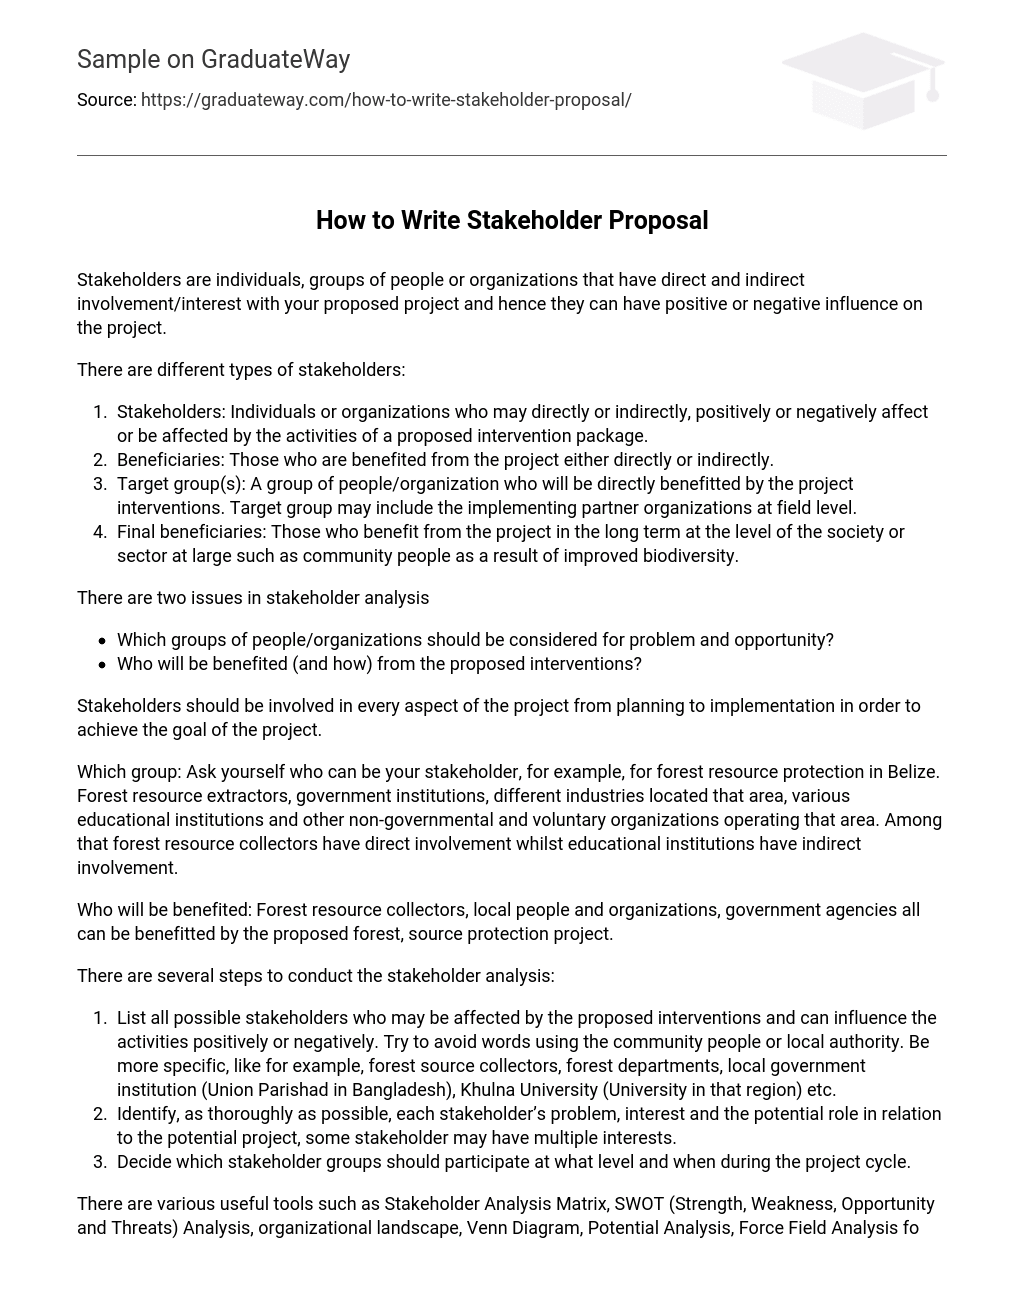 How to Write Stakeholder Proposal?